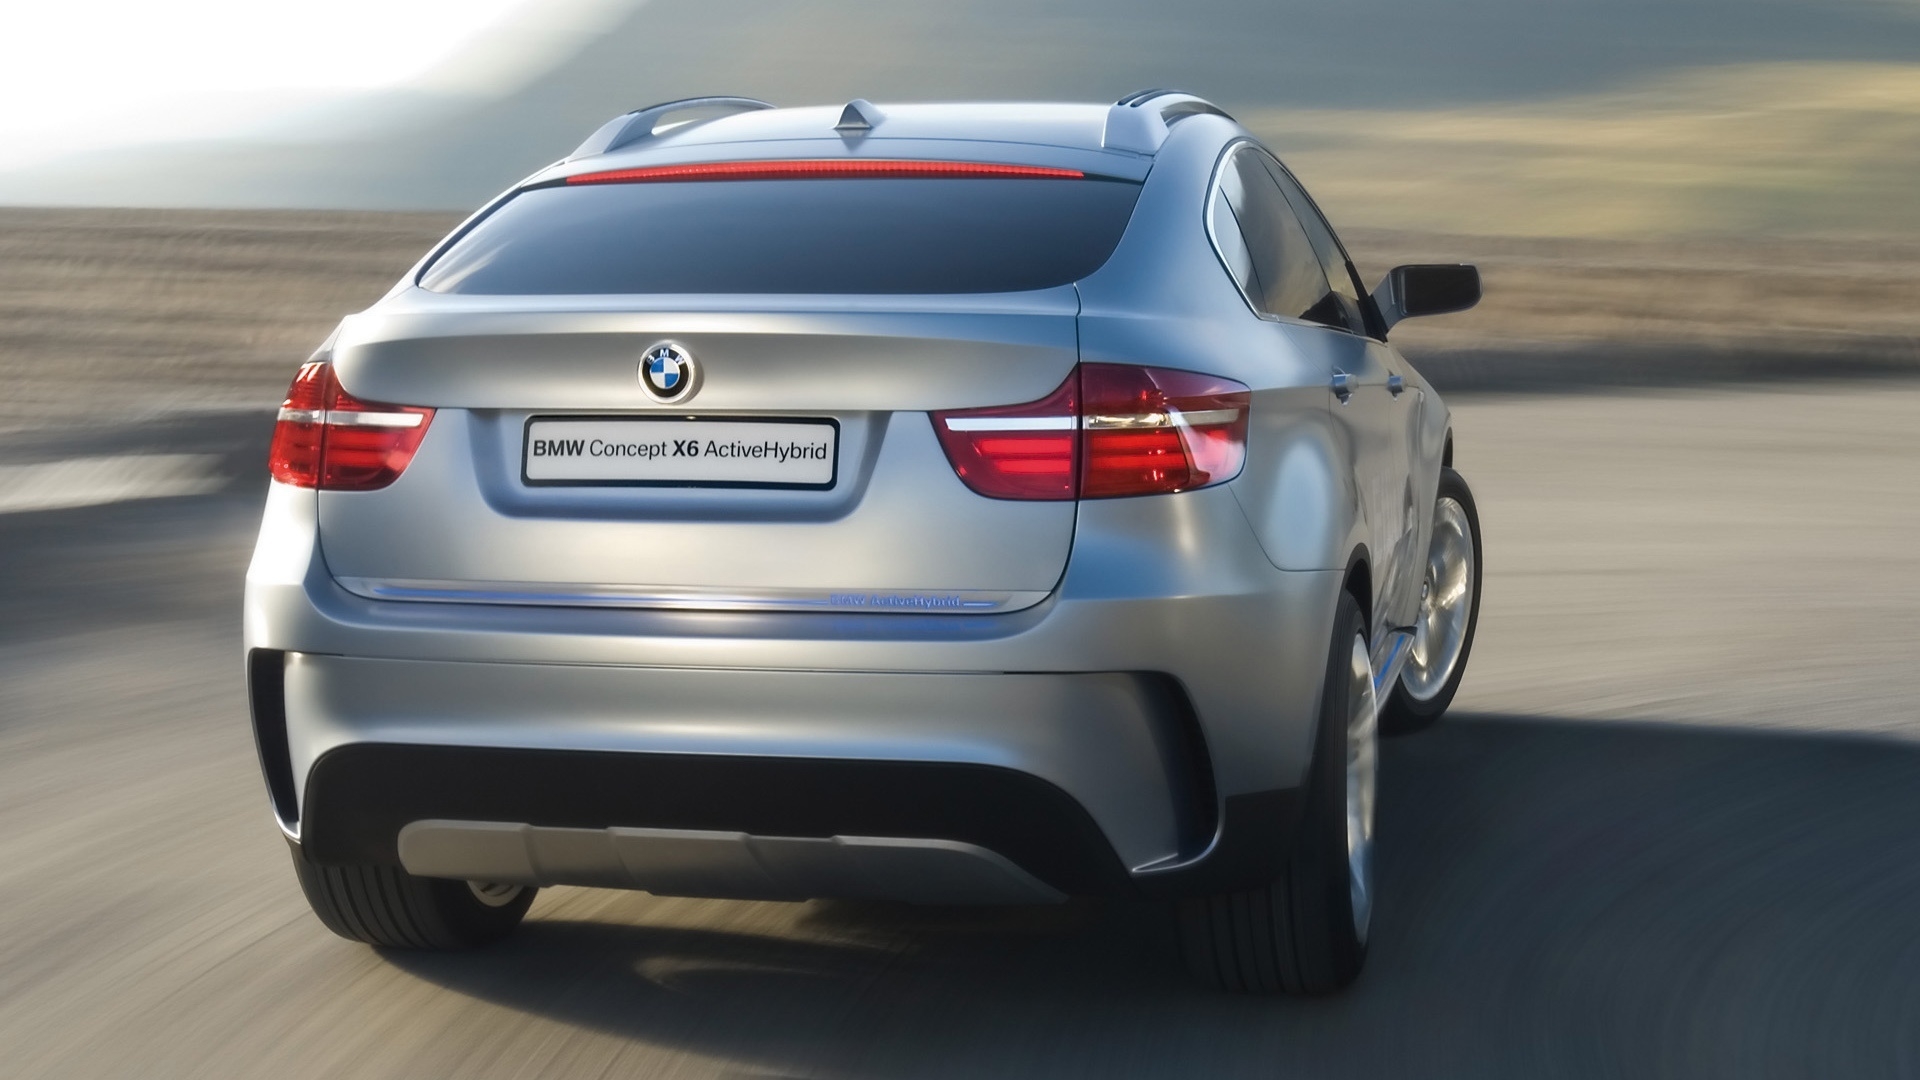 BMW Concept X6 ActiveHybrid Rear 2007 for 1920 x 1080 HDTV 1080p resolution